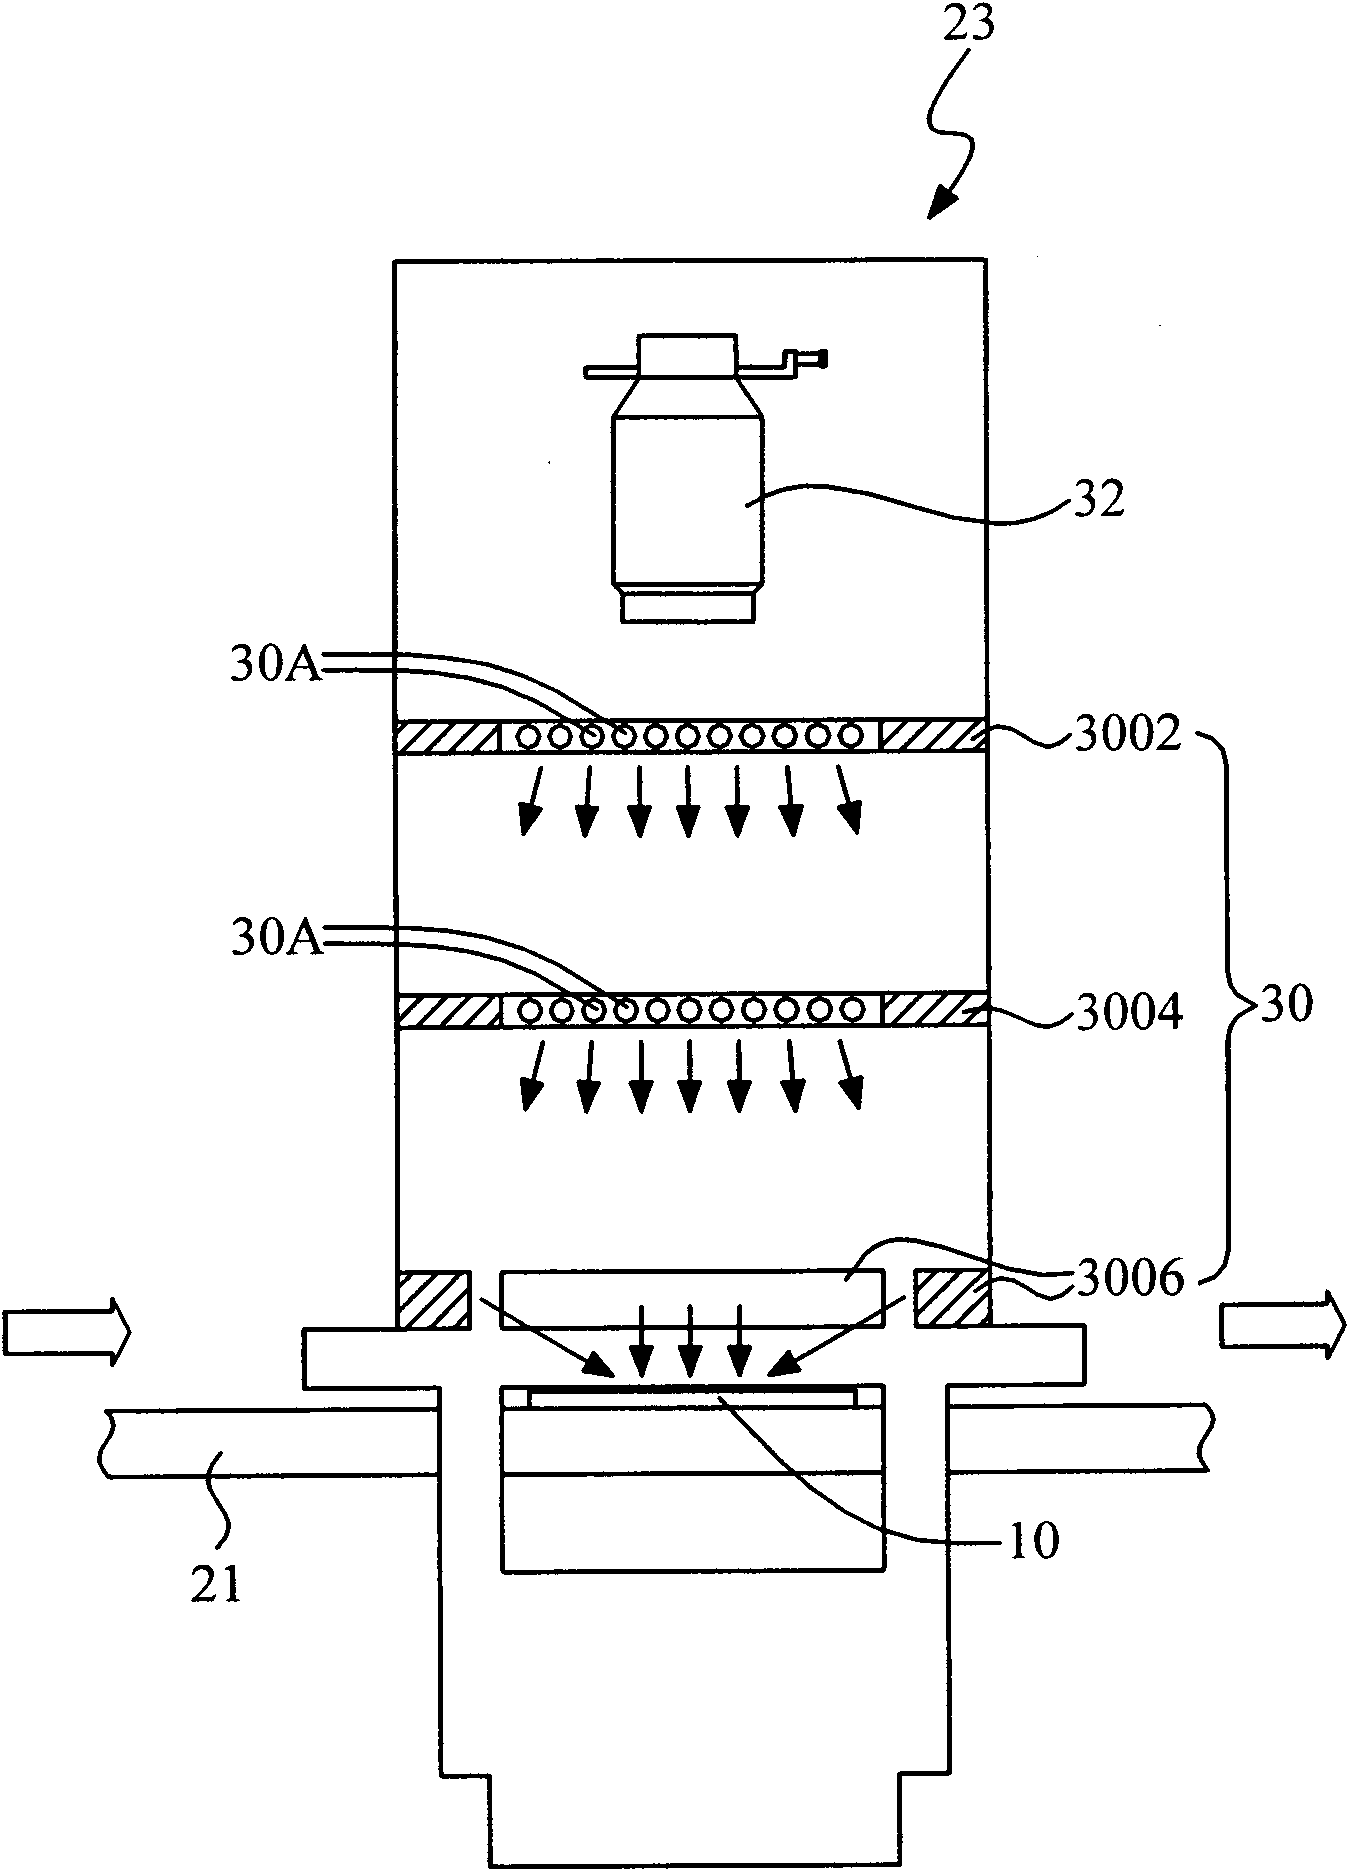 Optical detecting system and method for classifying solar cells